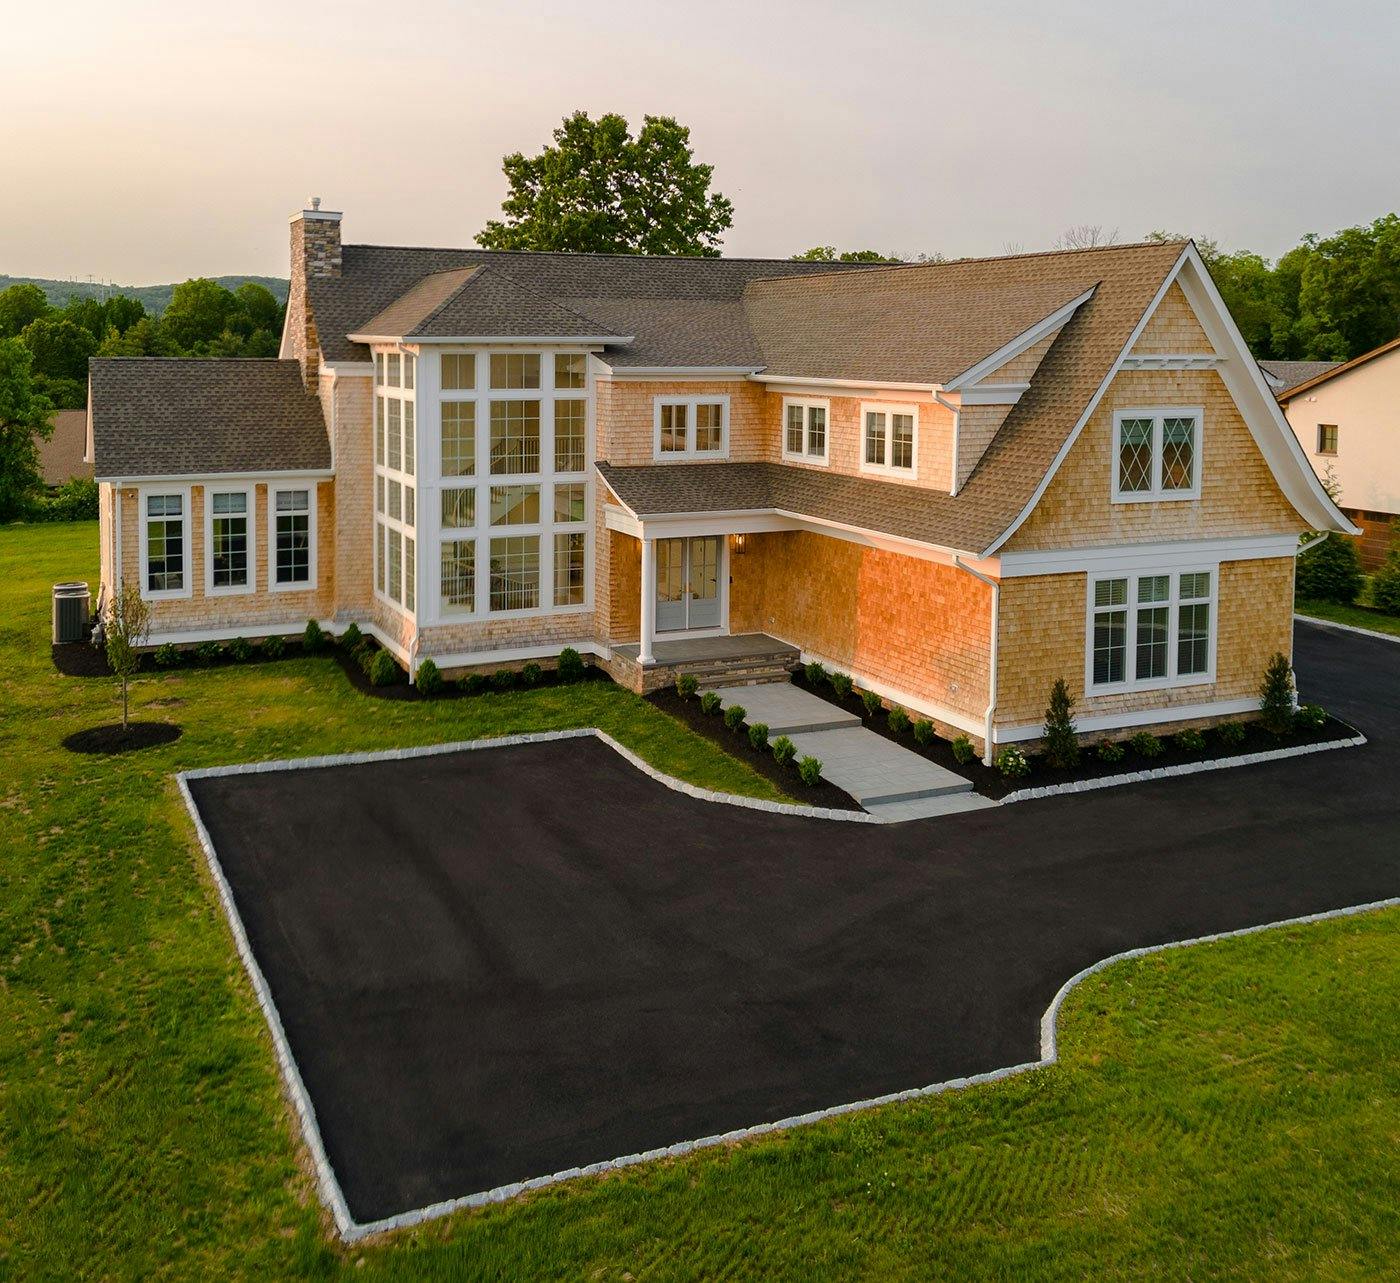 A home with brown wood shingles sits on a large plot of grassy land with a semi-circle driveway. The home has French doors and two stories of white windows with diamond and square window patterns